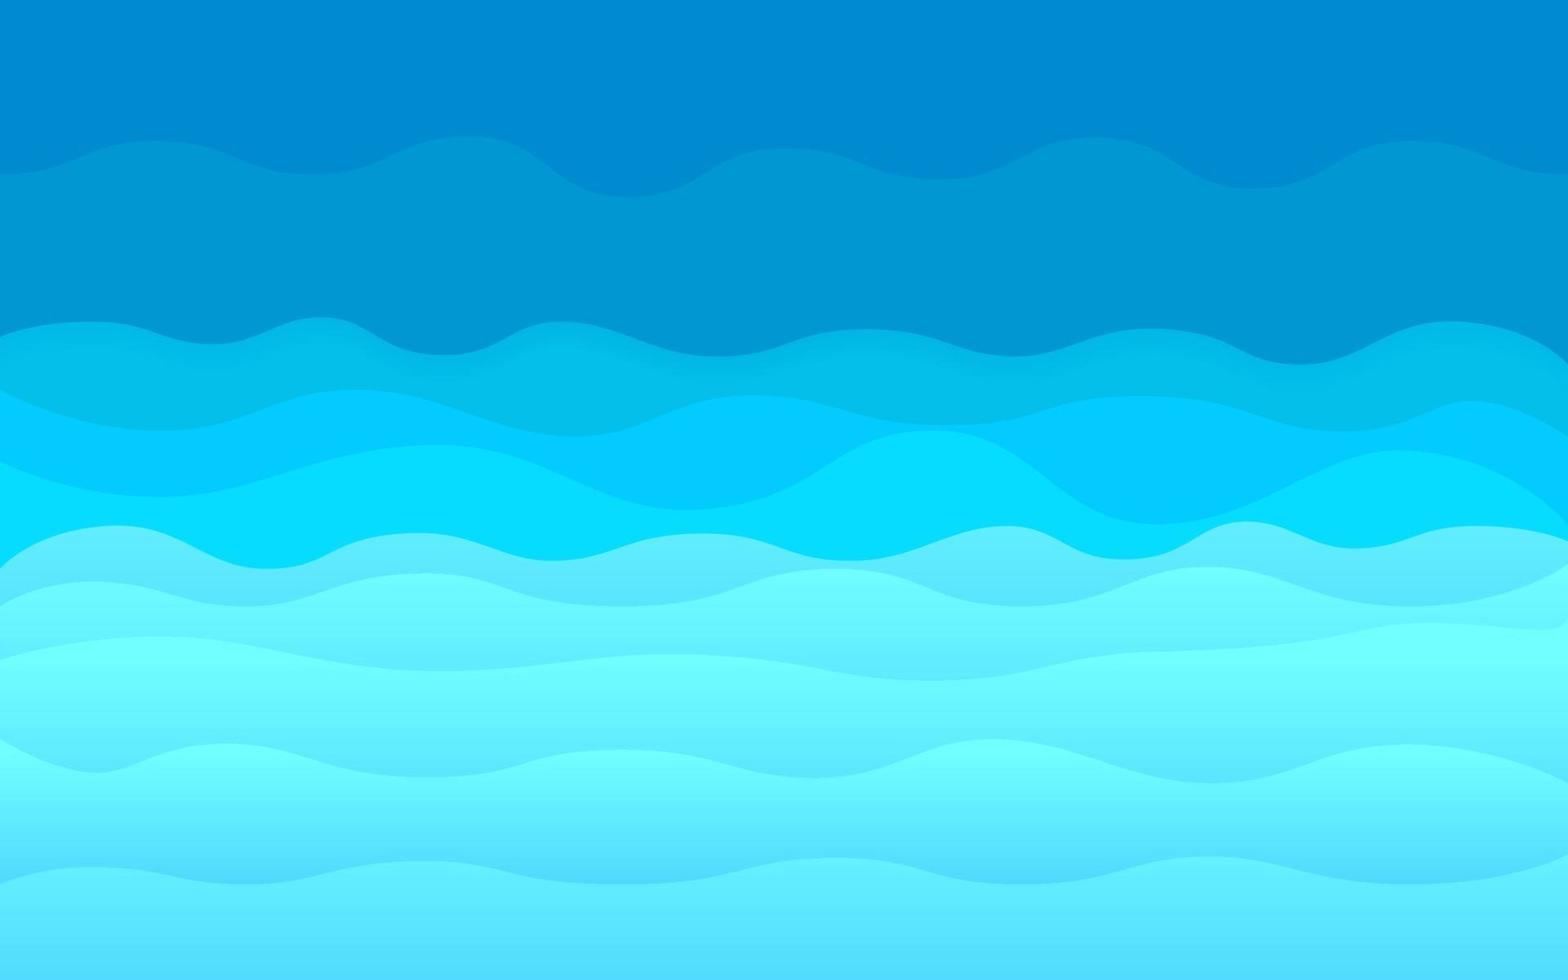 Blue abstract ocean waves vector background